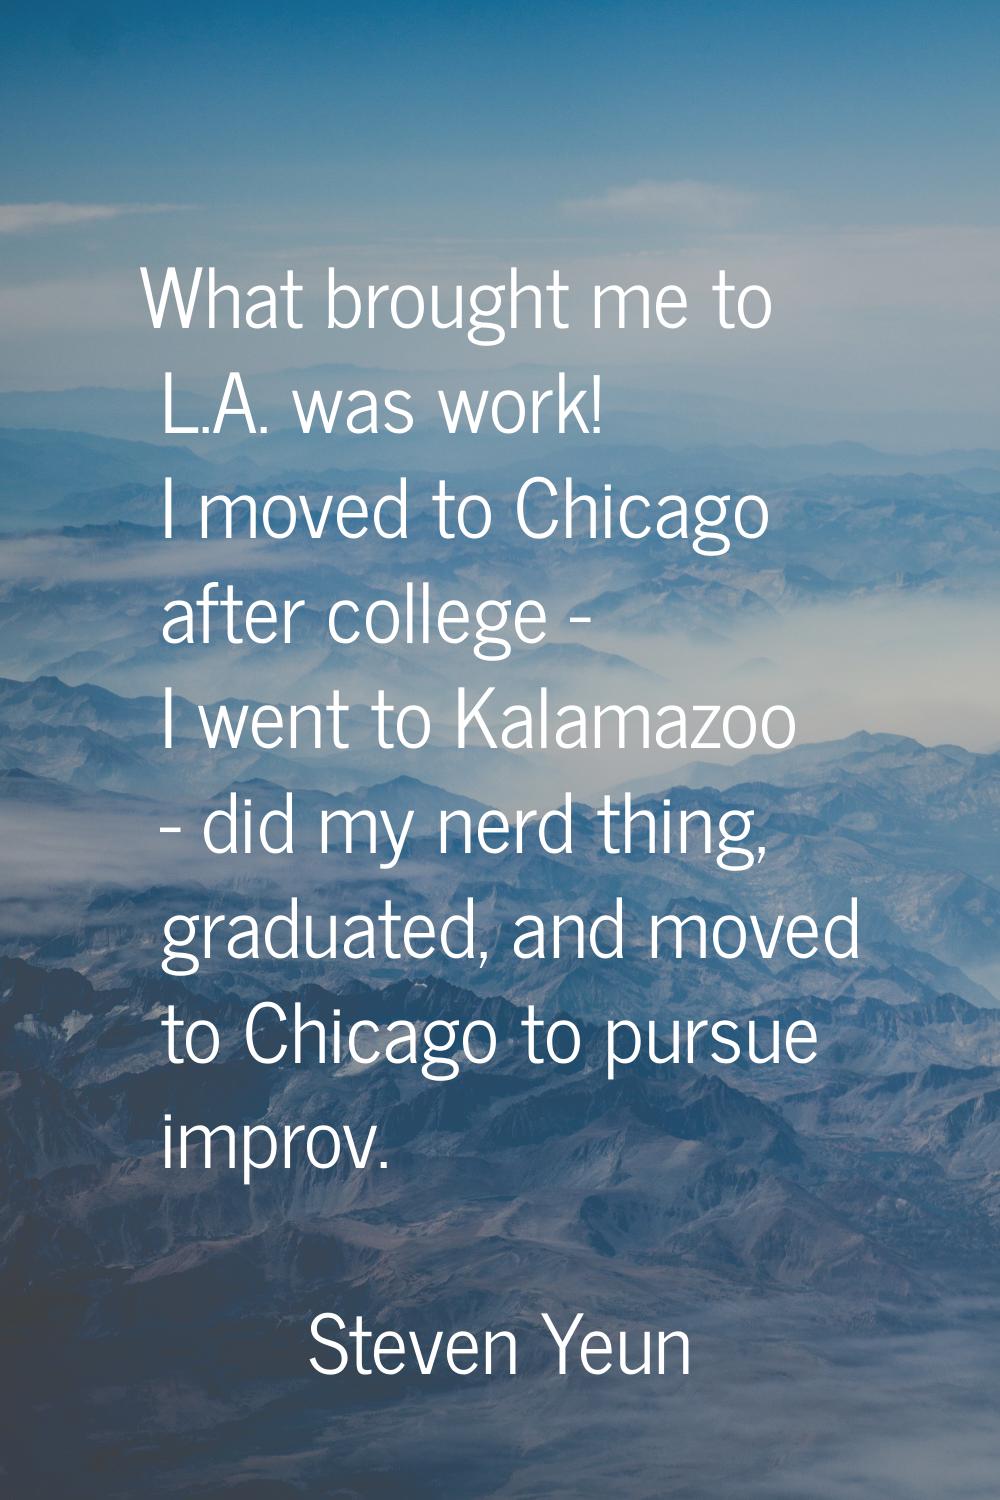 What brought me to L.A. was work! I moved to Chicago after college - I went to Kalamazoo - did my n